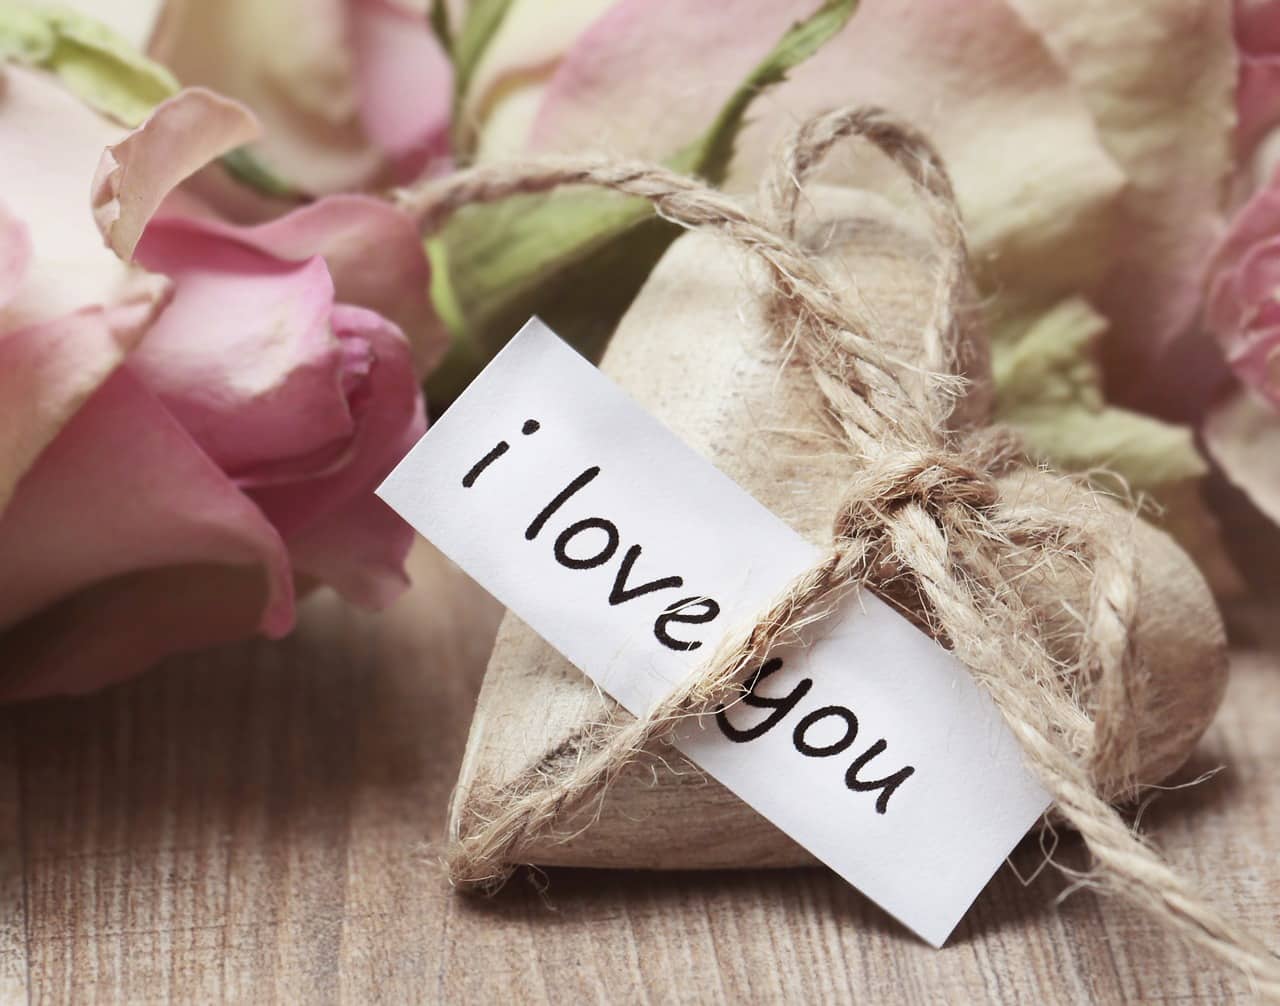 100+] I Love You Images, Photo, Pic & Wallpaper (HD)